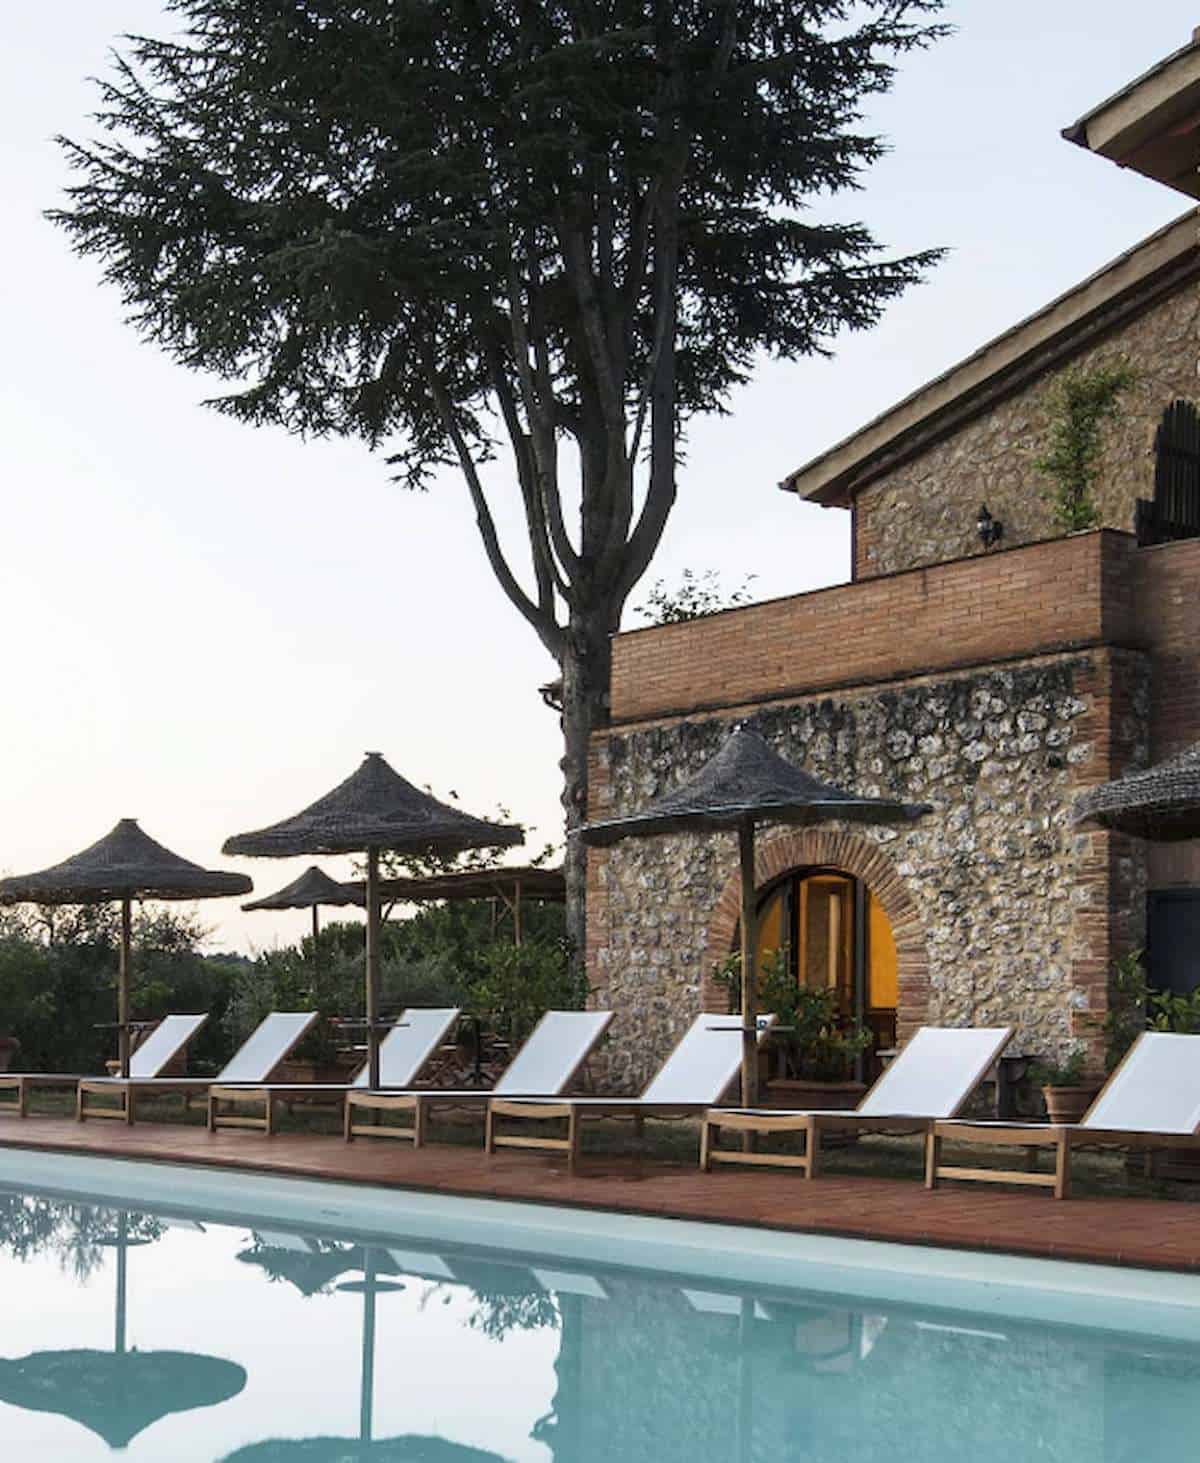 Pool and lounge chairs at I Pini Agrivilla in Tuscany.